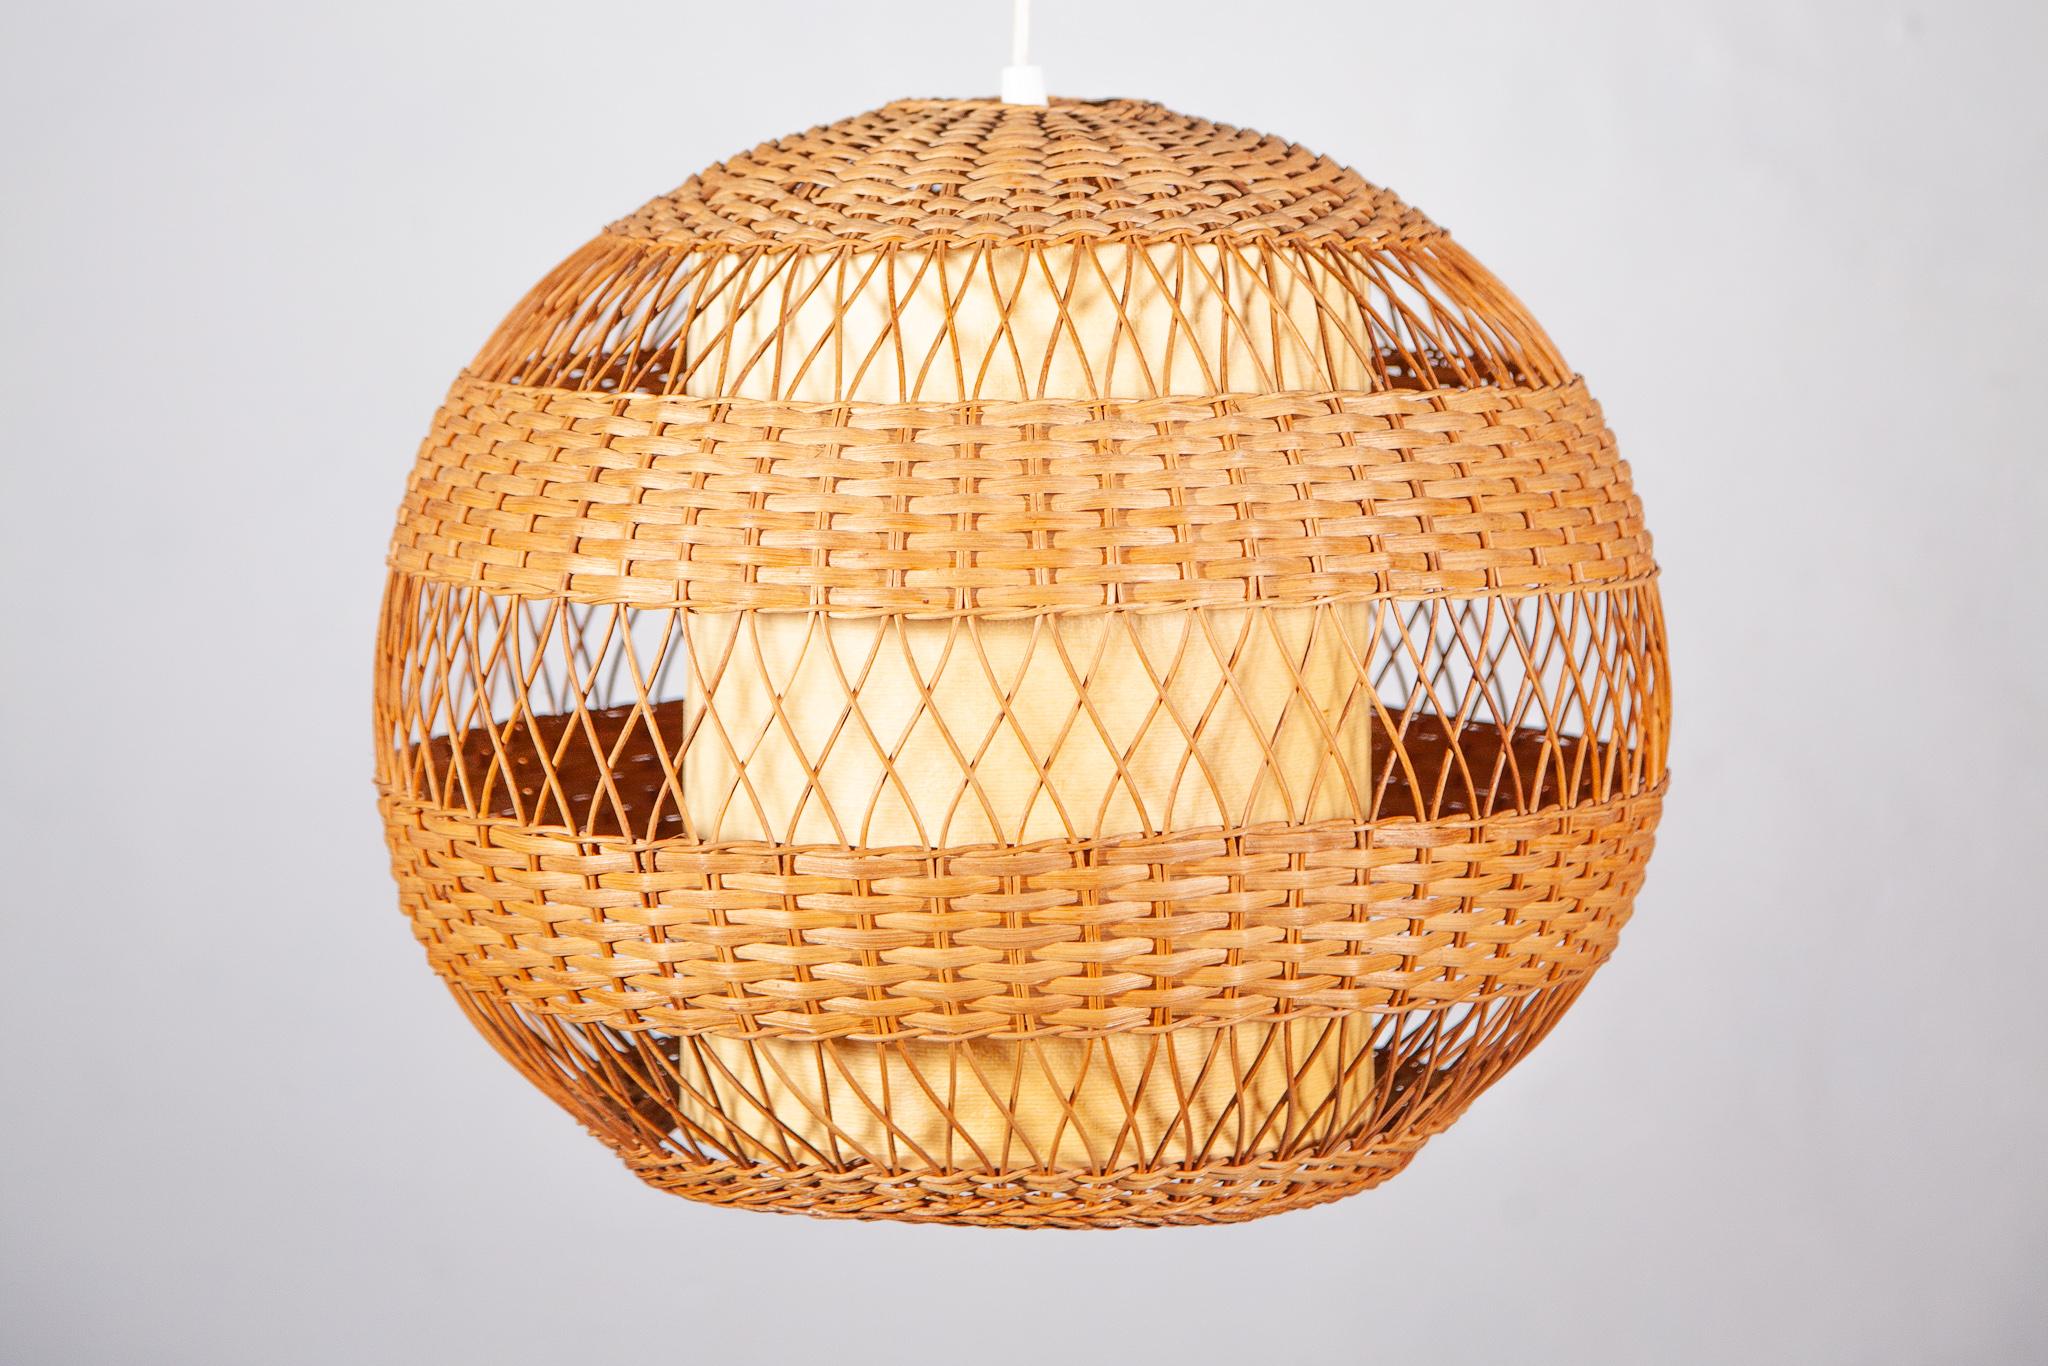 Natural organic woven wicker and bamboo large globe pendant hanging light 1950s.The beautiful suspension lamp features a bamboo and wicker wire. The pendant lamp will be a nice addition hanging over a dining table, kitchen's table or any room with